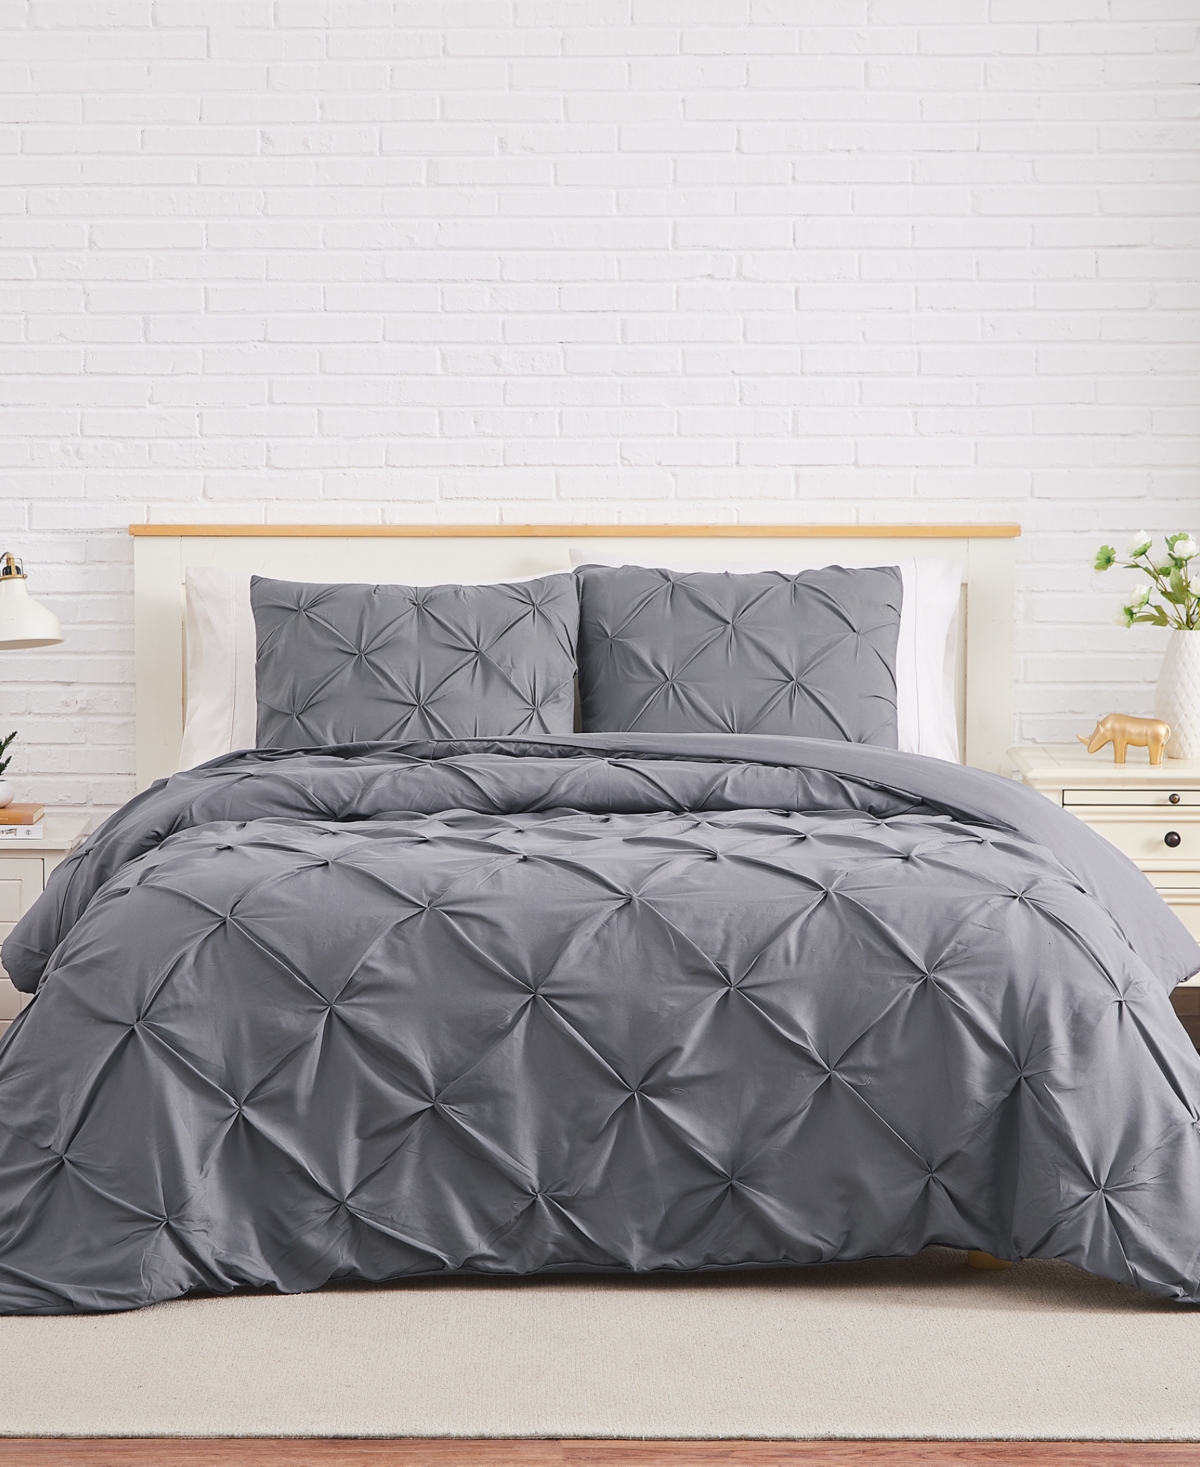 Southshore Fine Linens Pintuck 3 Piece Duvet Cover And Sham Set, King/california King In Slate